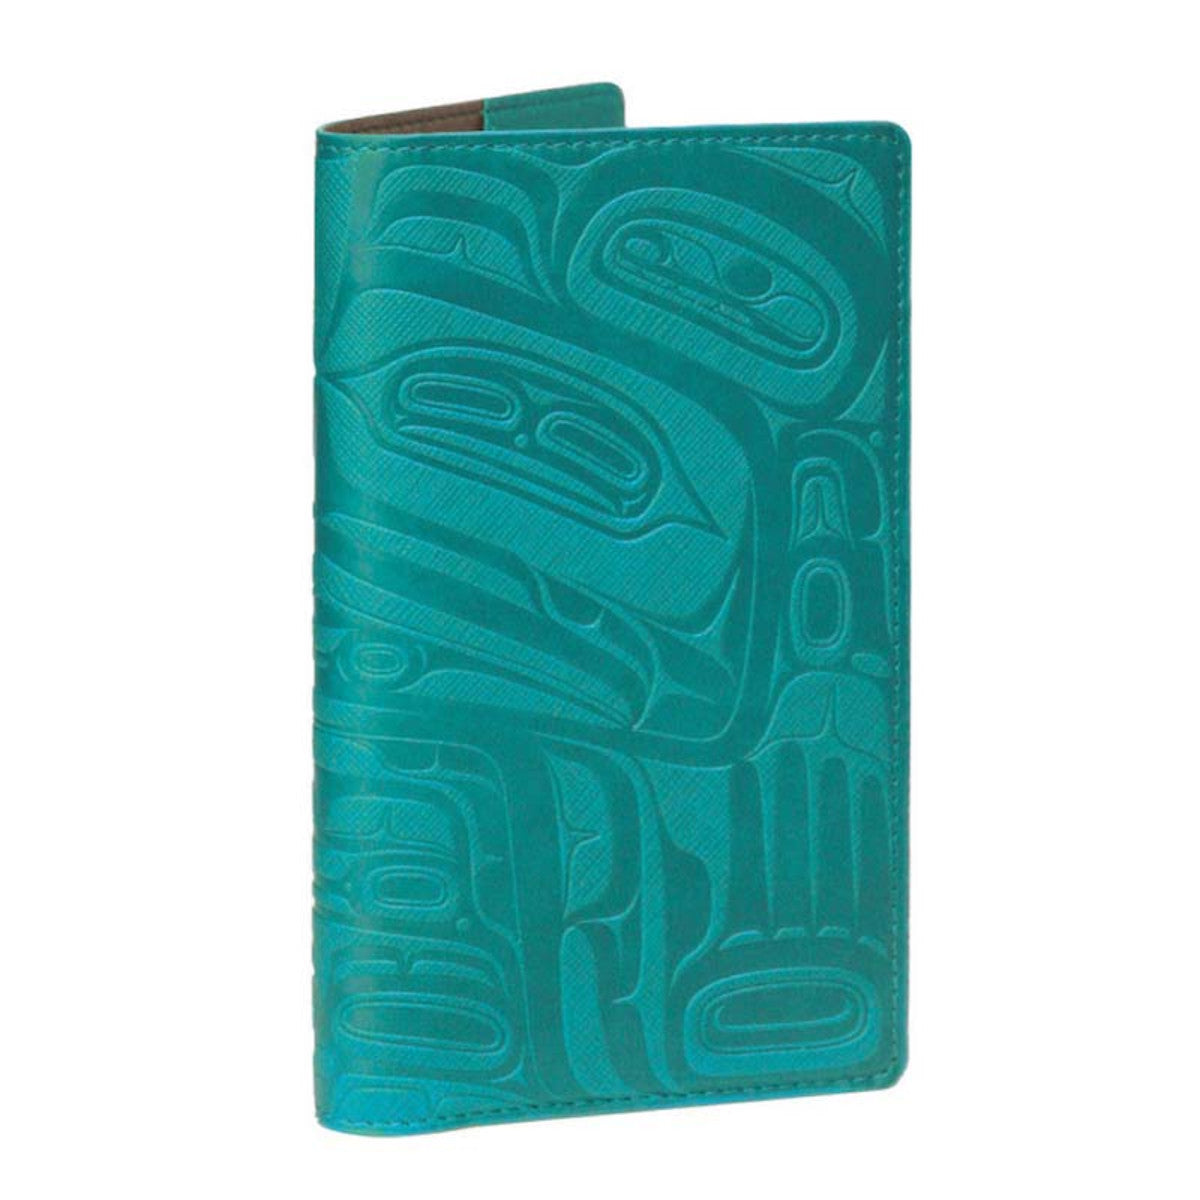 Bear box Travel Wallet by Ernest Swanson (Turquoise)